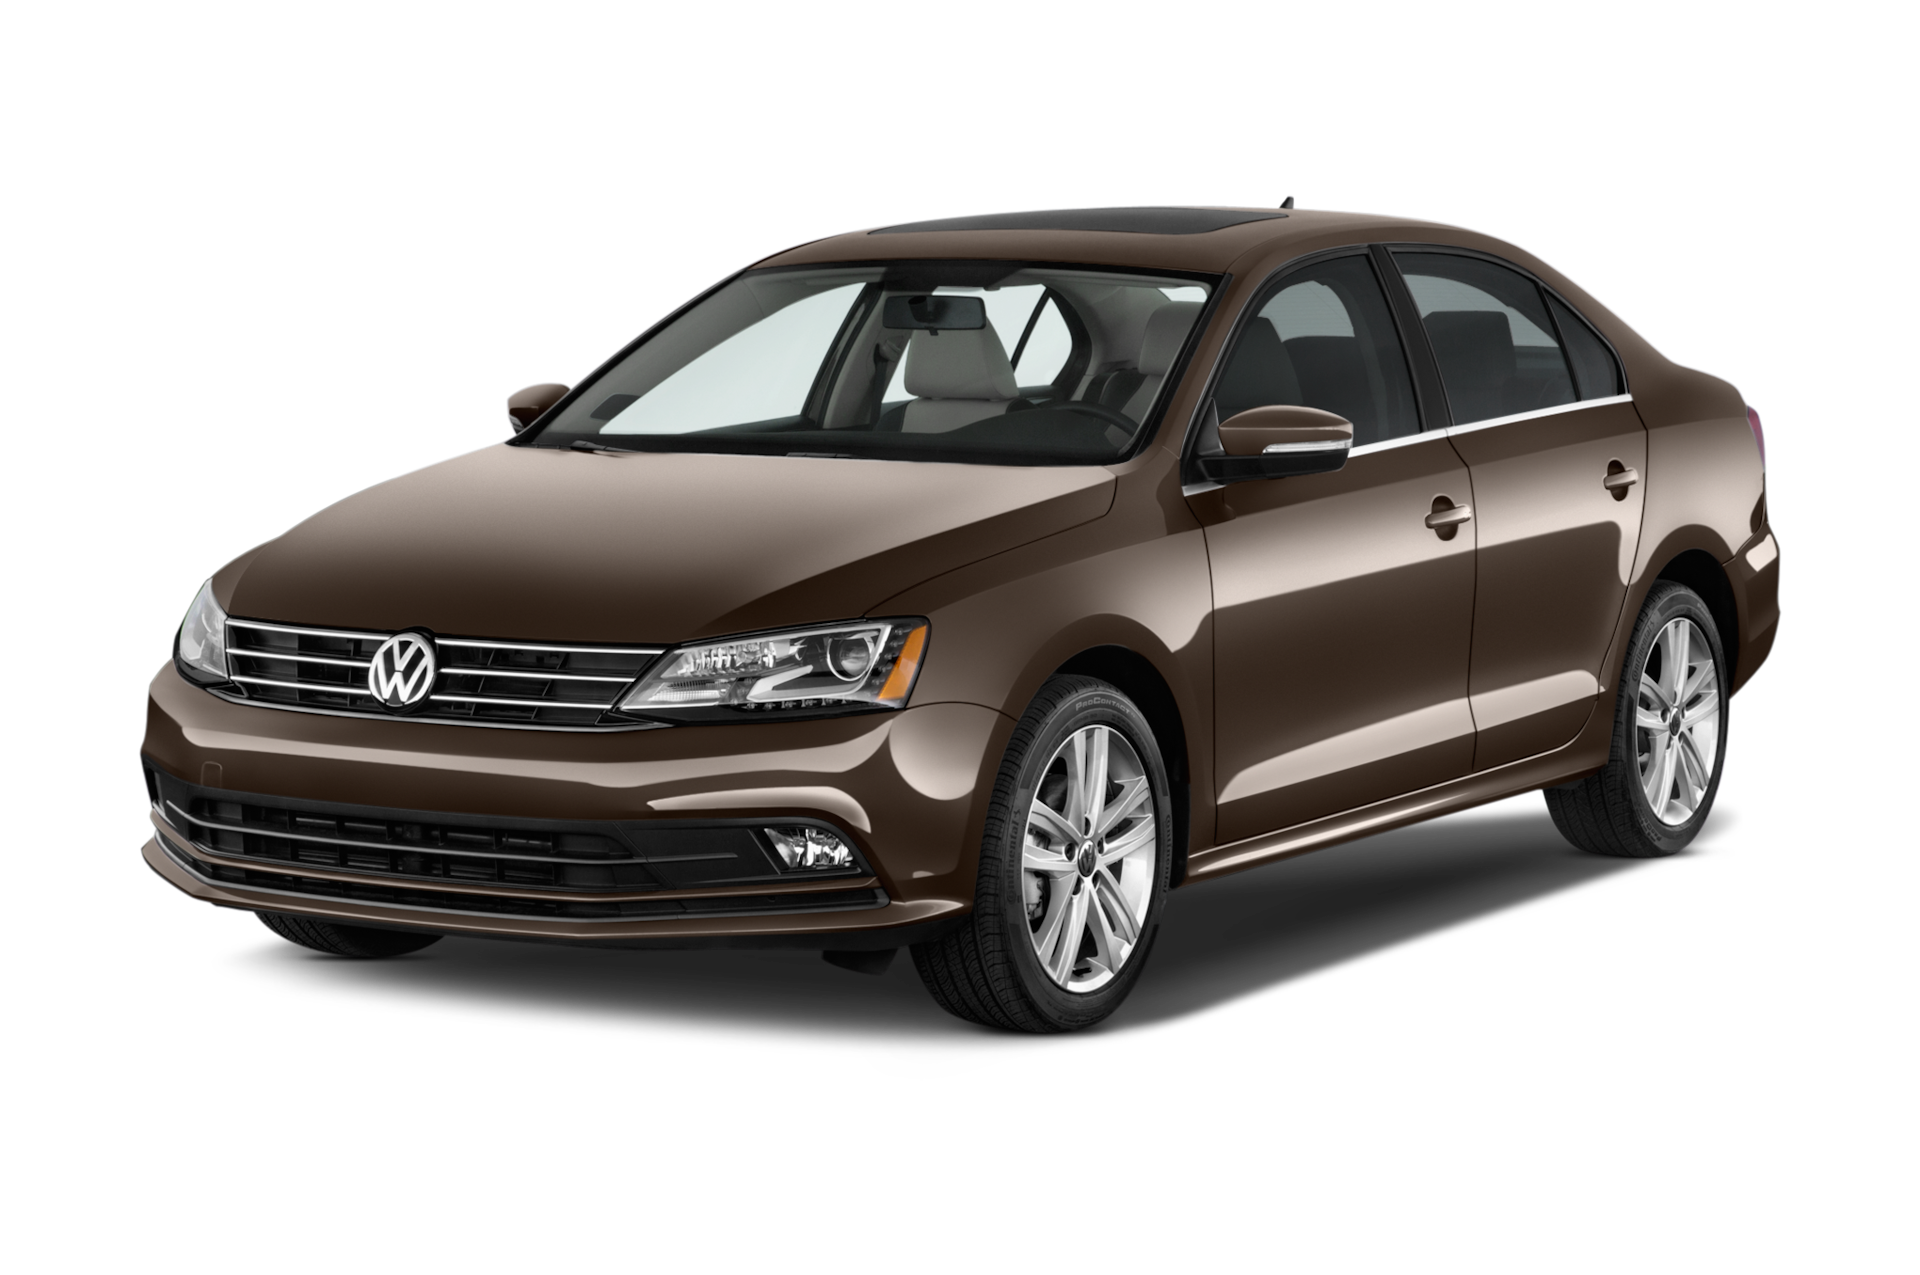 2016 Volkswagen Jetta Prices, Reviews, and Photos - MotorTrend